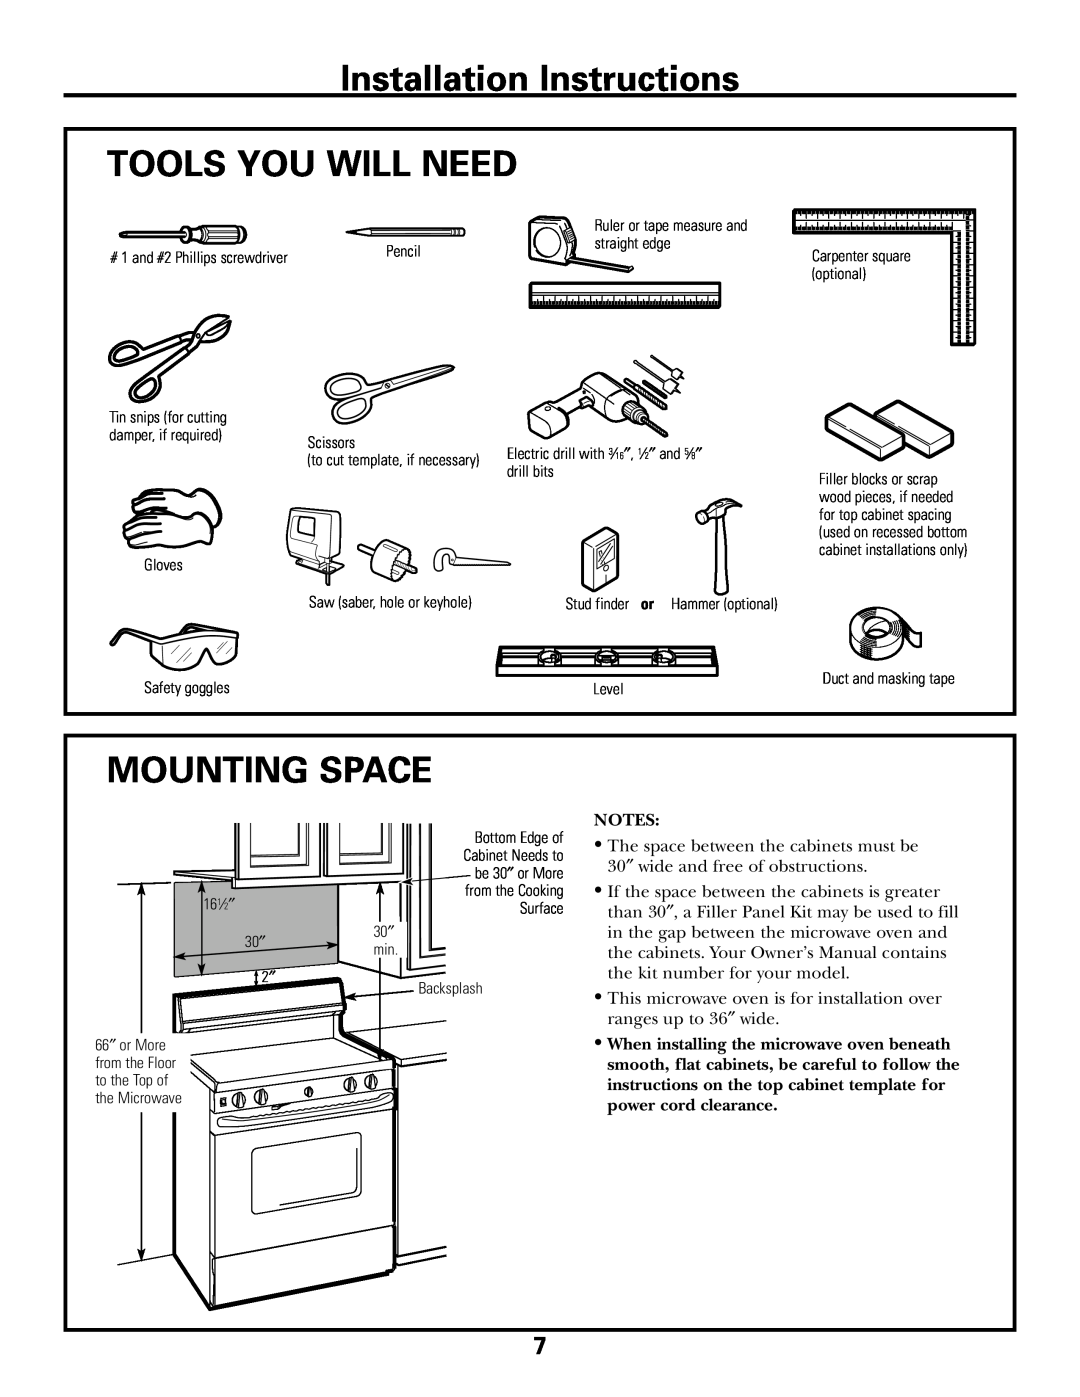 GE 39-40425, DE68-02957A warranty Installation Instructions TOOLS YOU WILL NEED, Mounting Space, Notes 